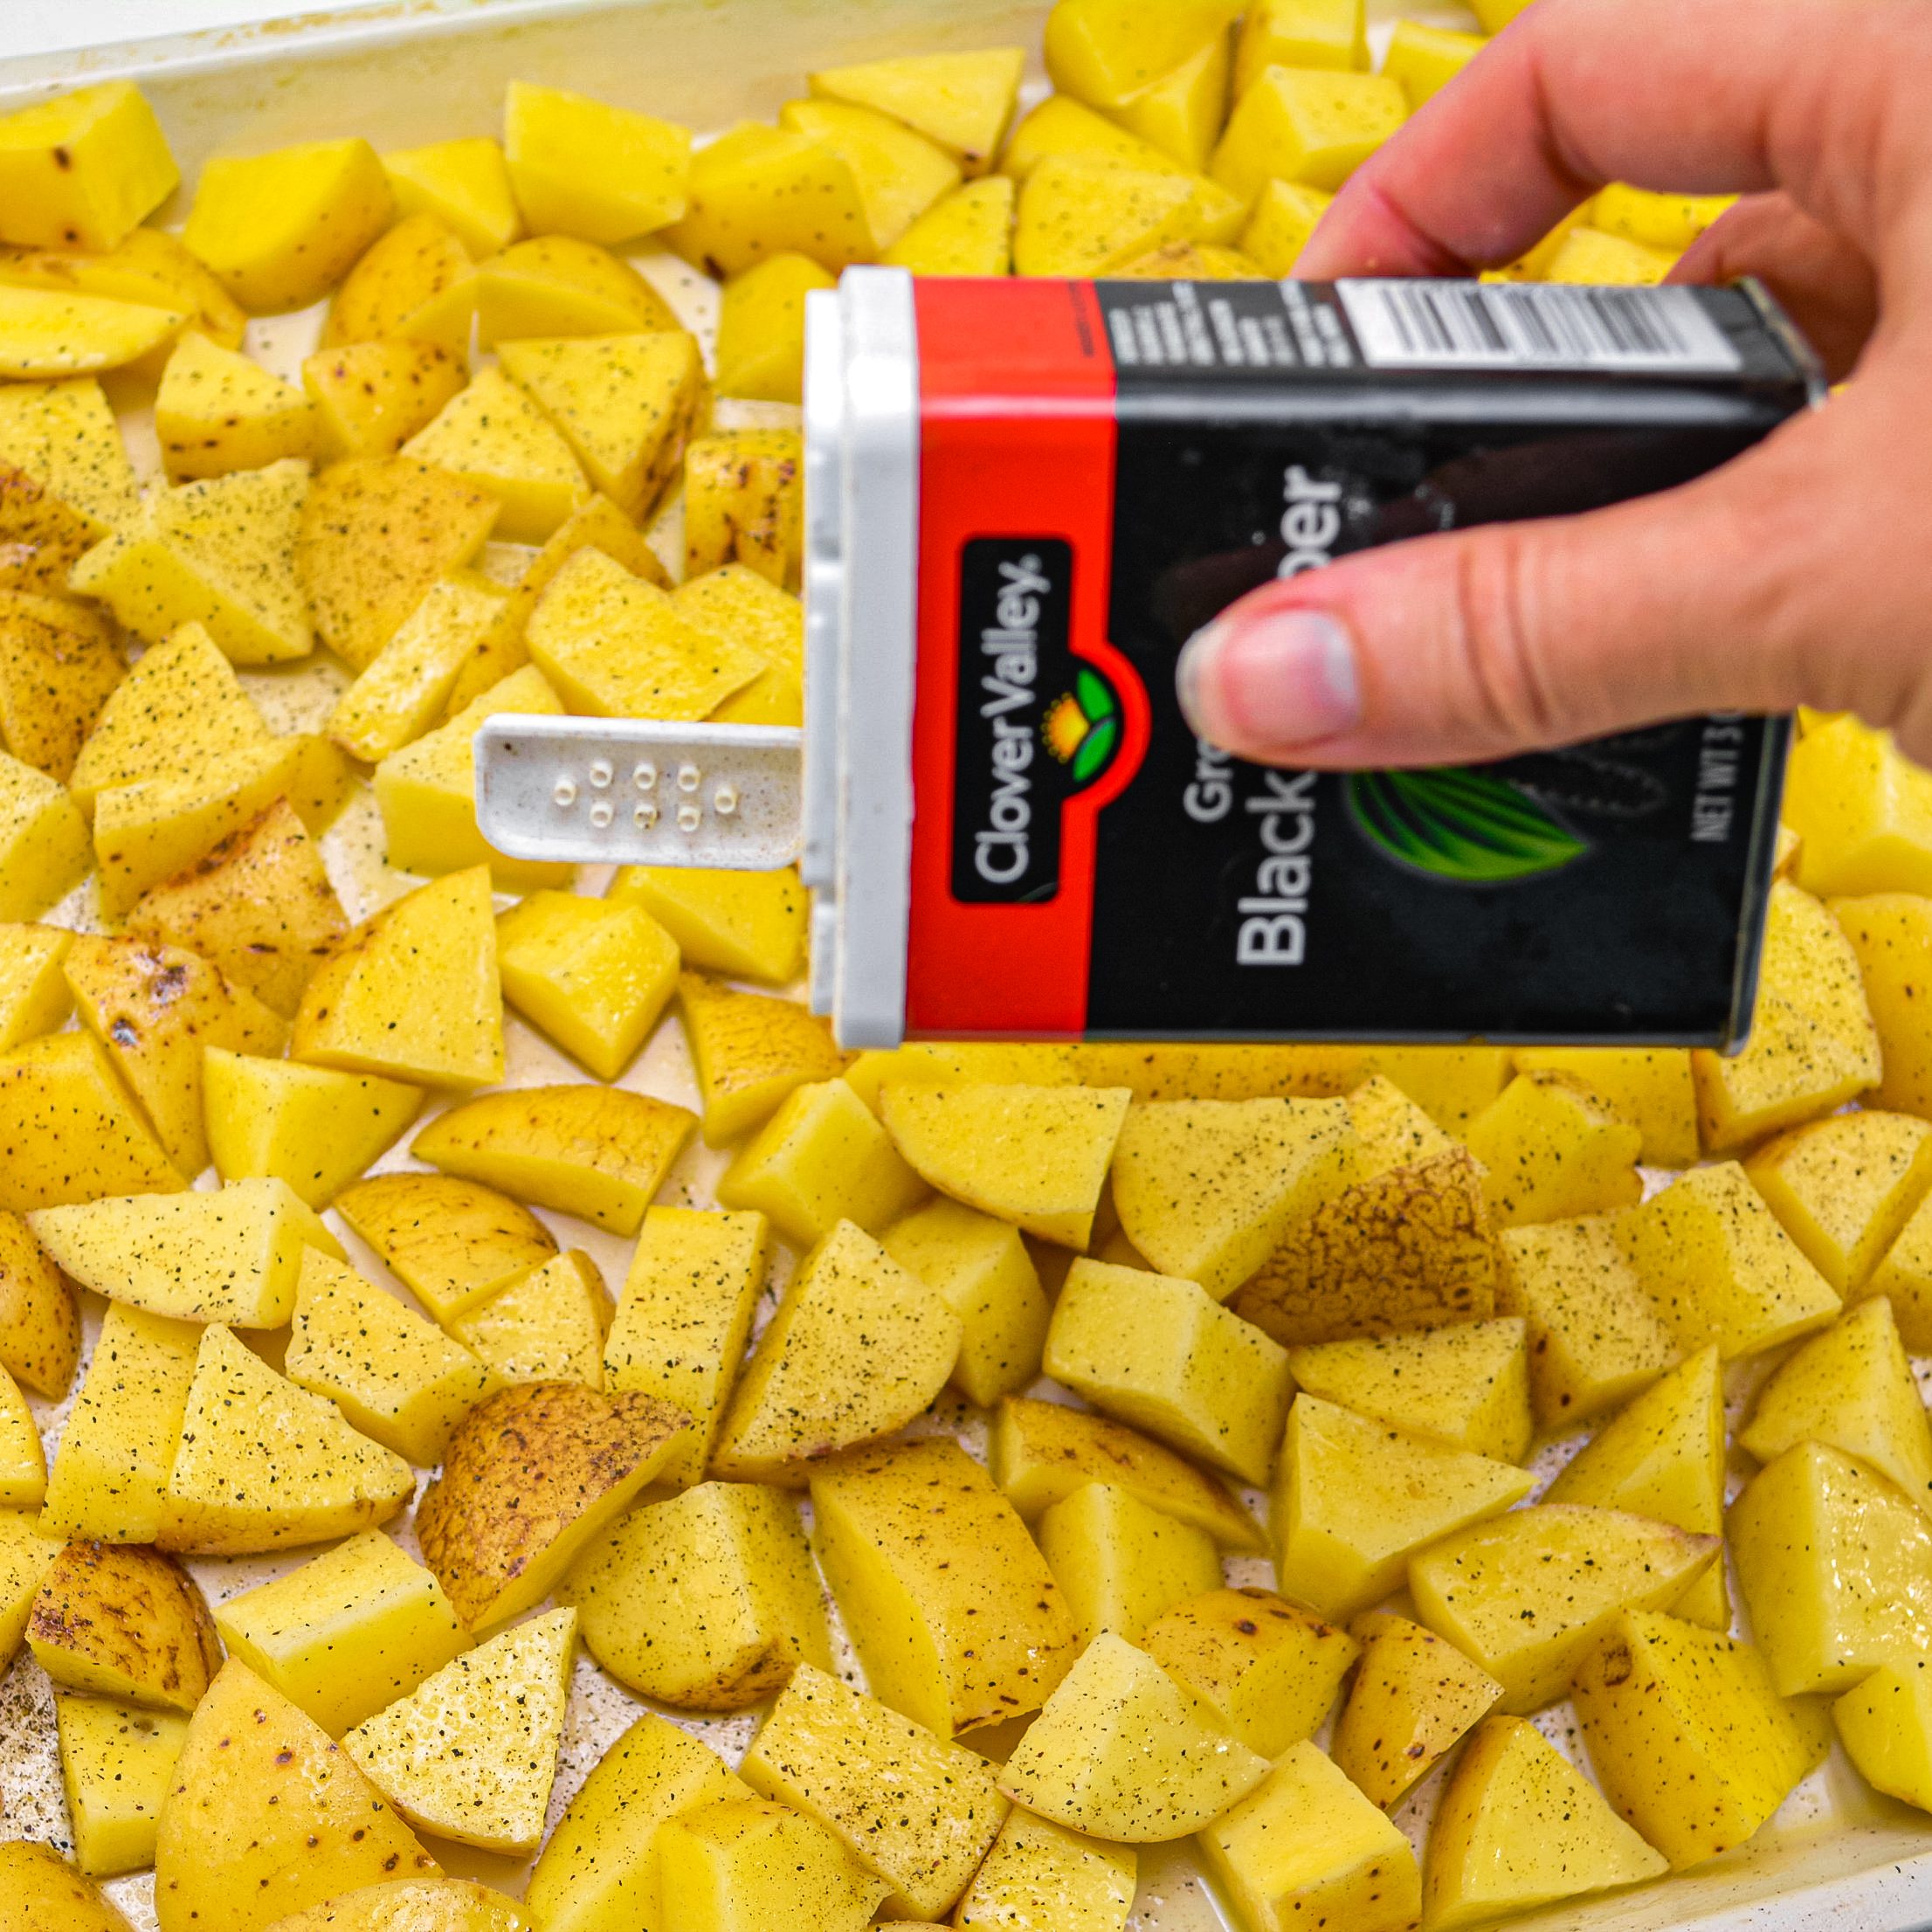 Add salt and pepper to taste to the potatoes.